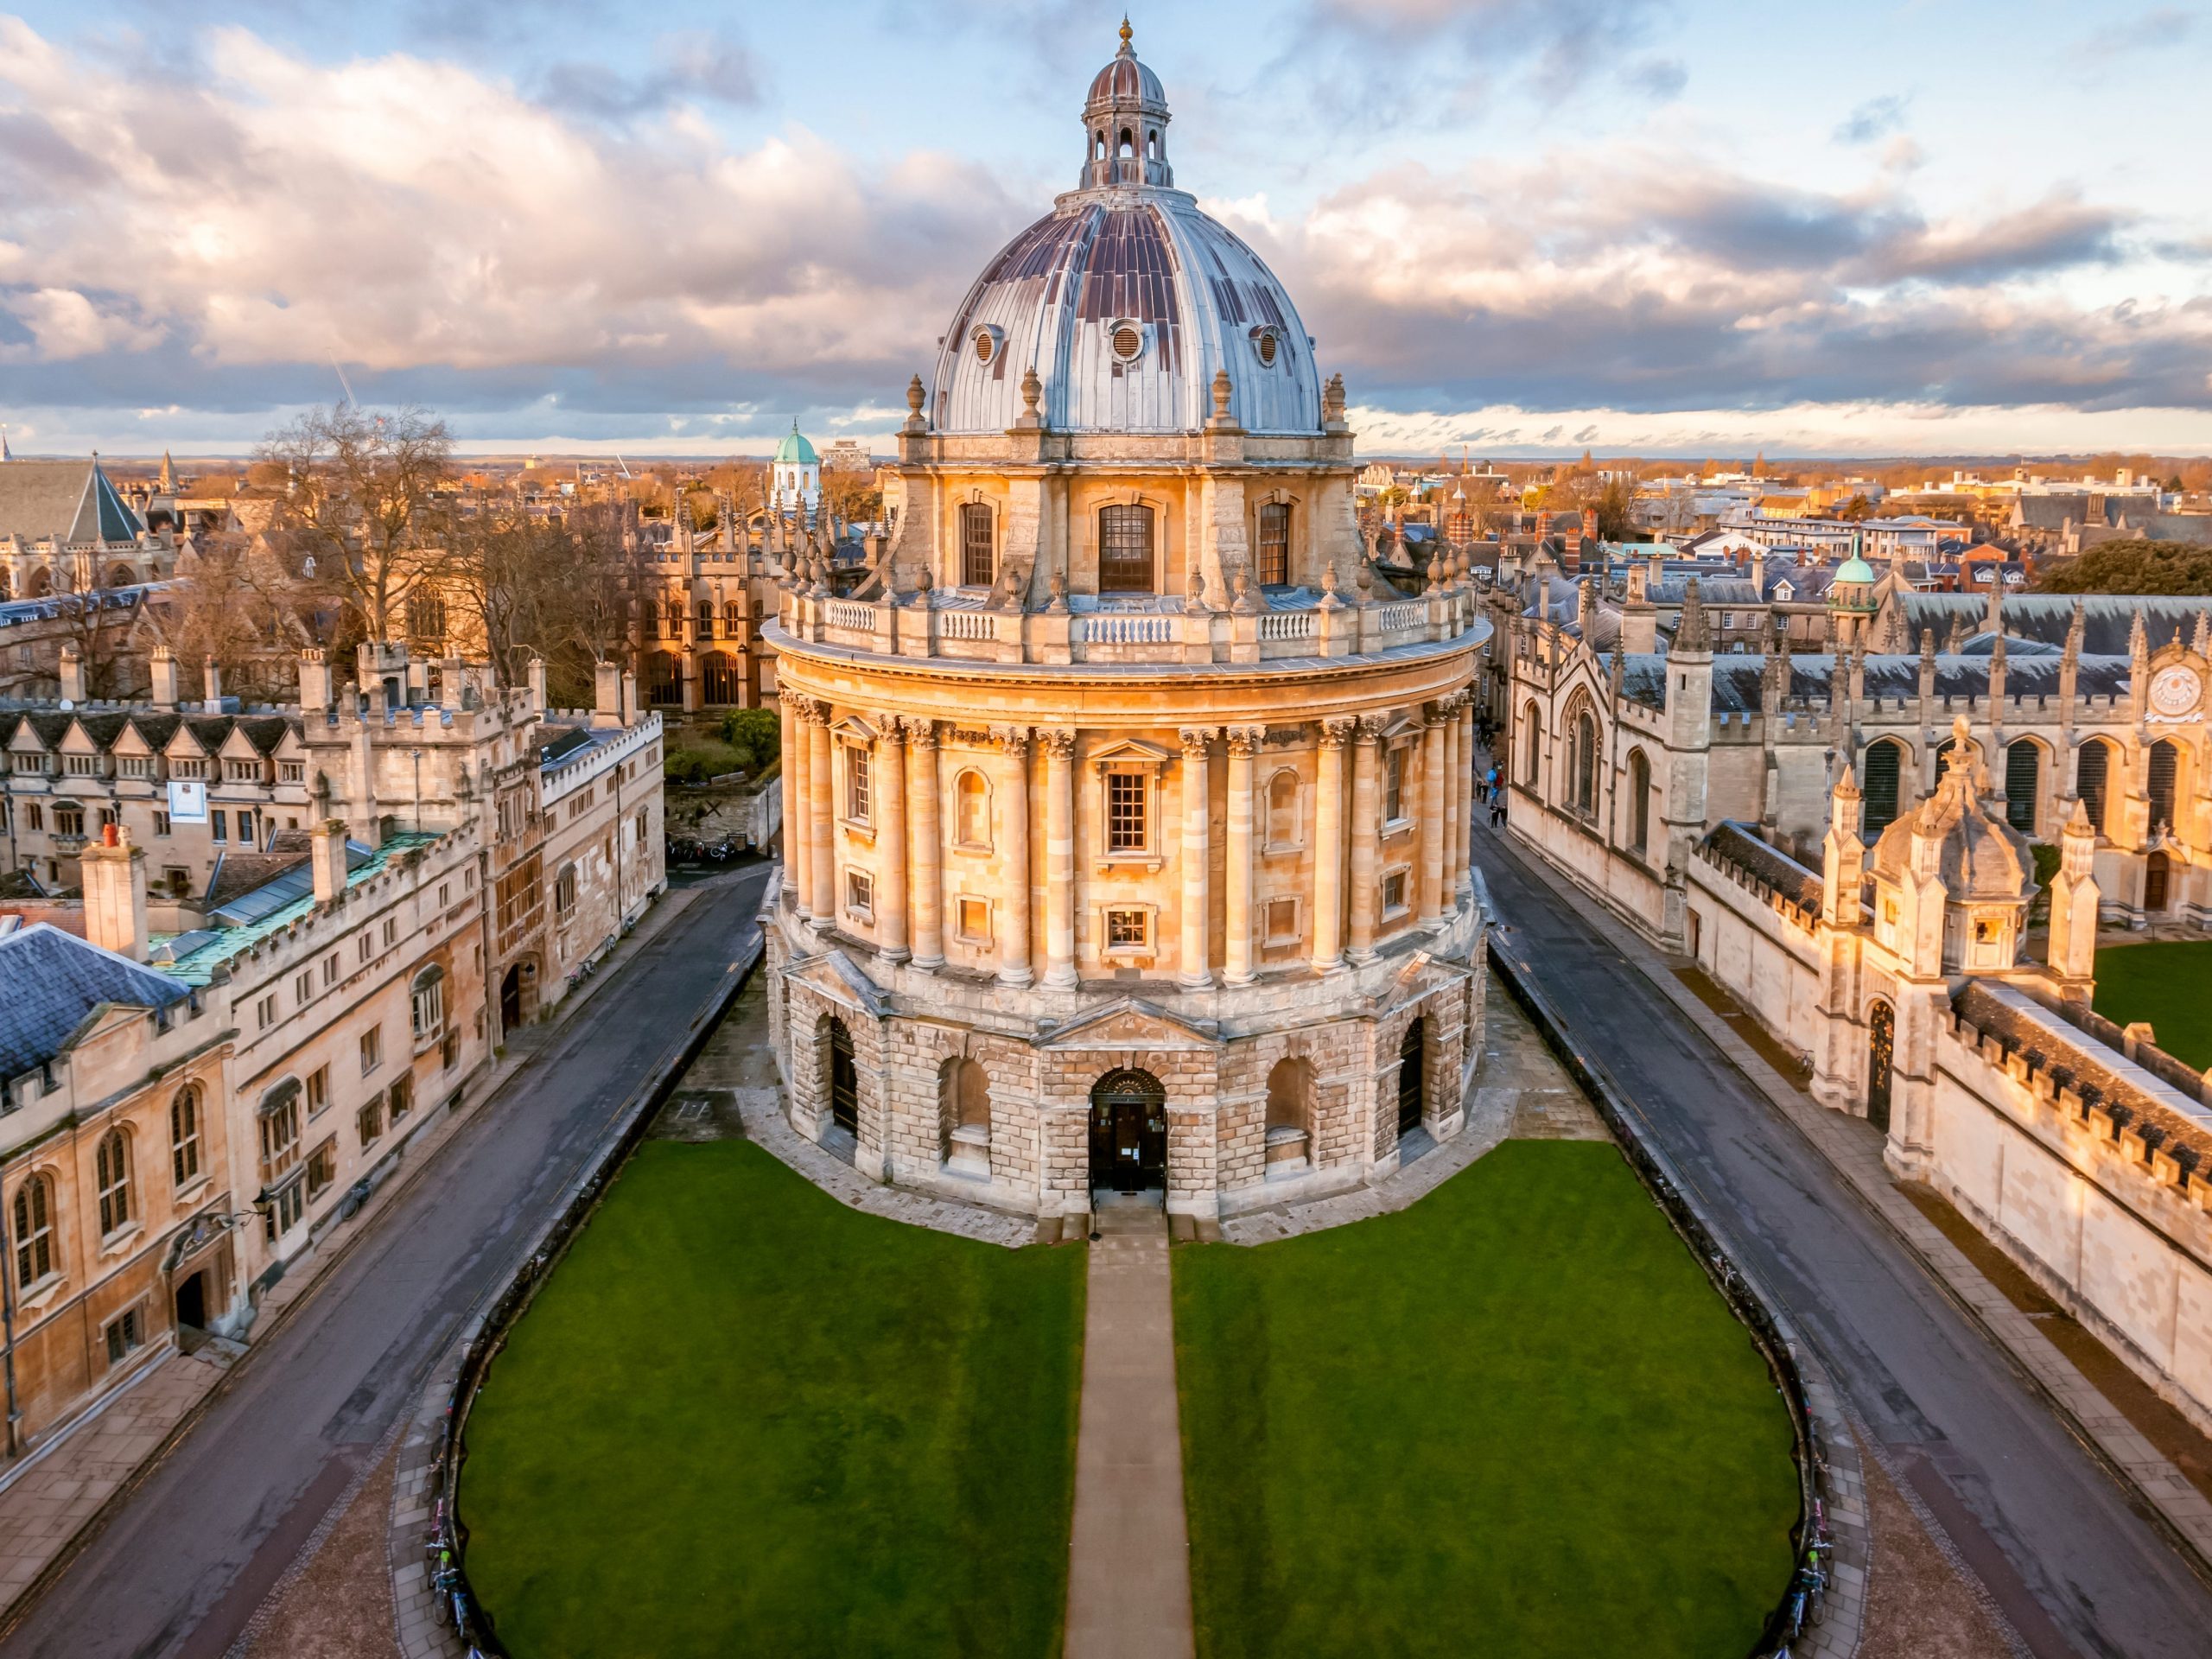 The Radcliffe Camera at Oxford University